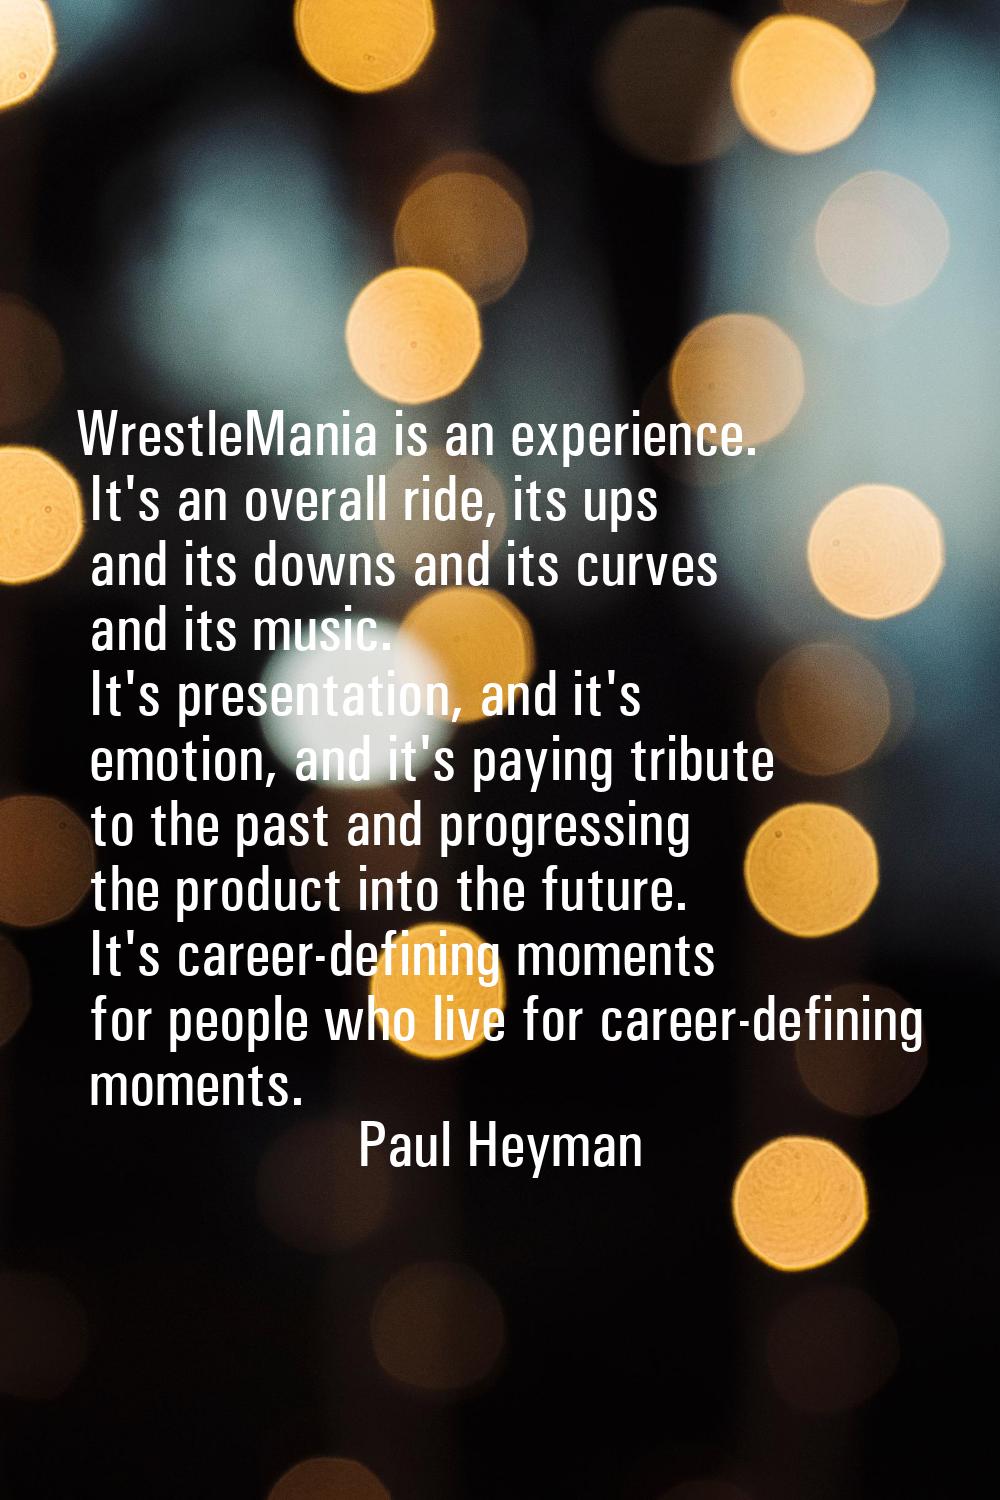 WrestleMania is an experience. It's an overall ride, its ups and its downs and its curves and its m